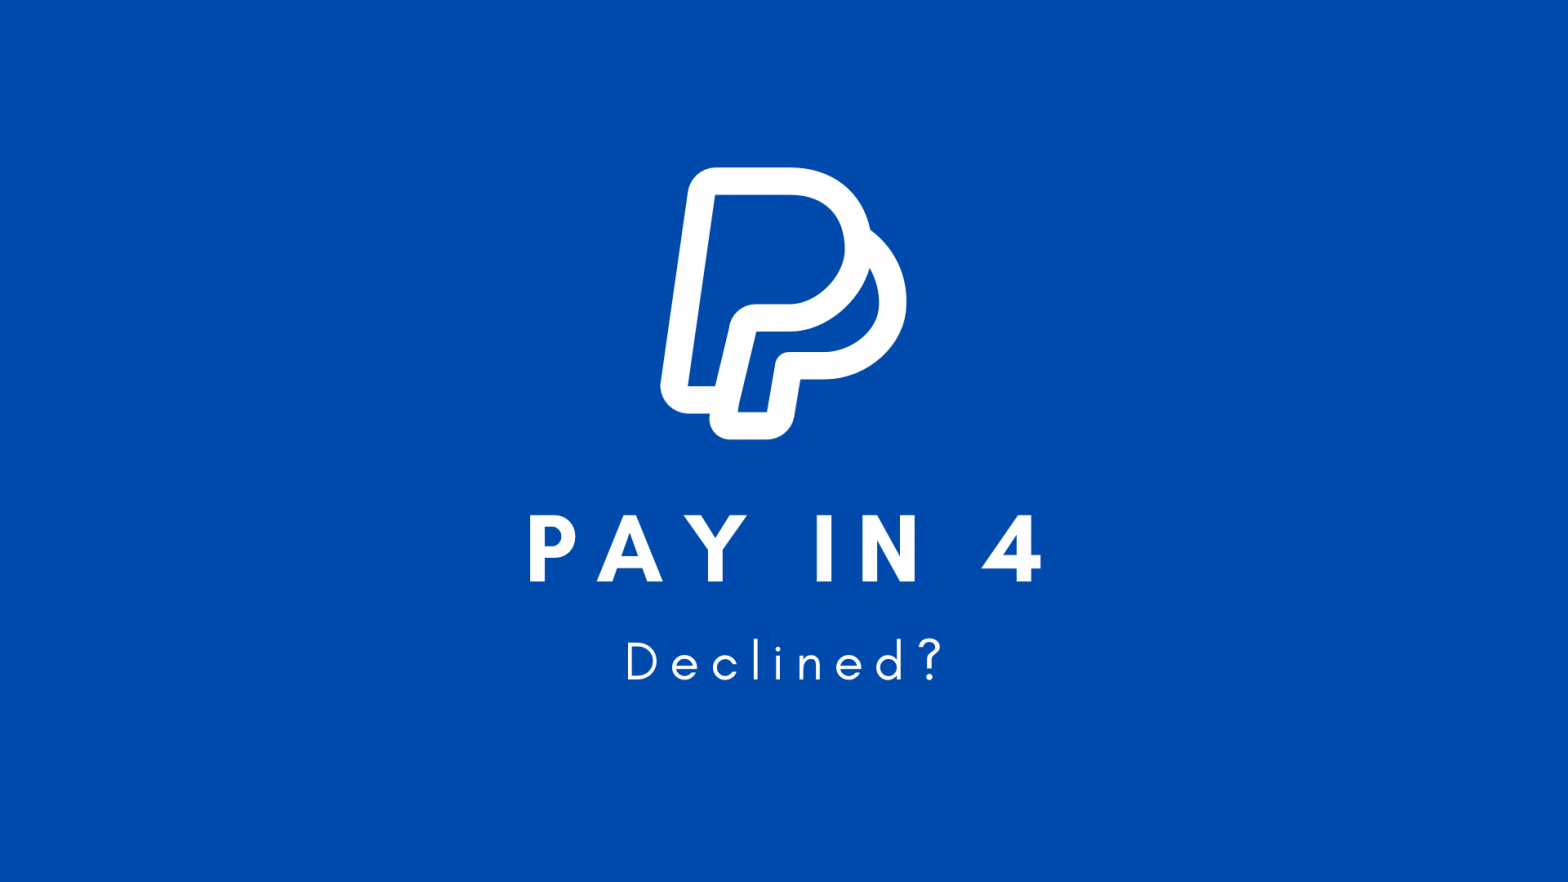 Pay in 4 denied